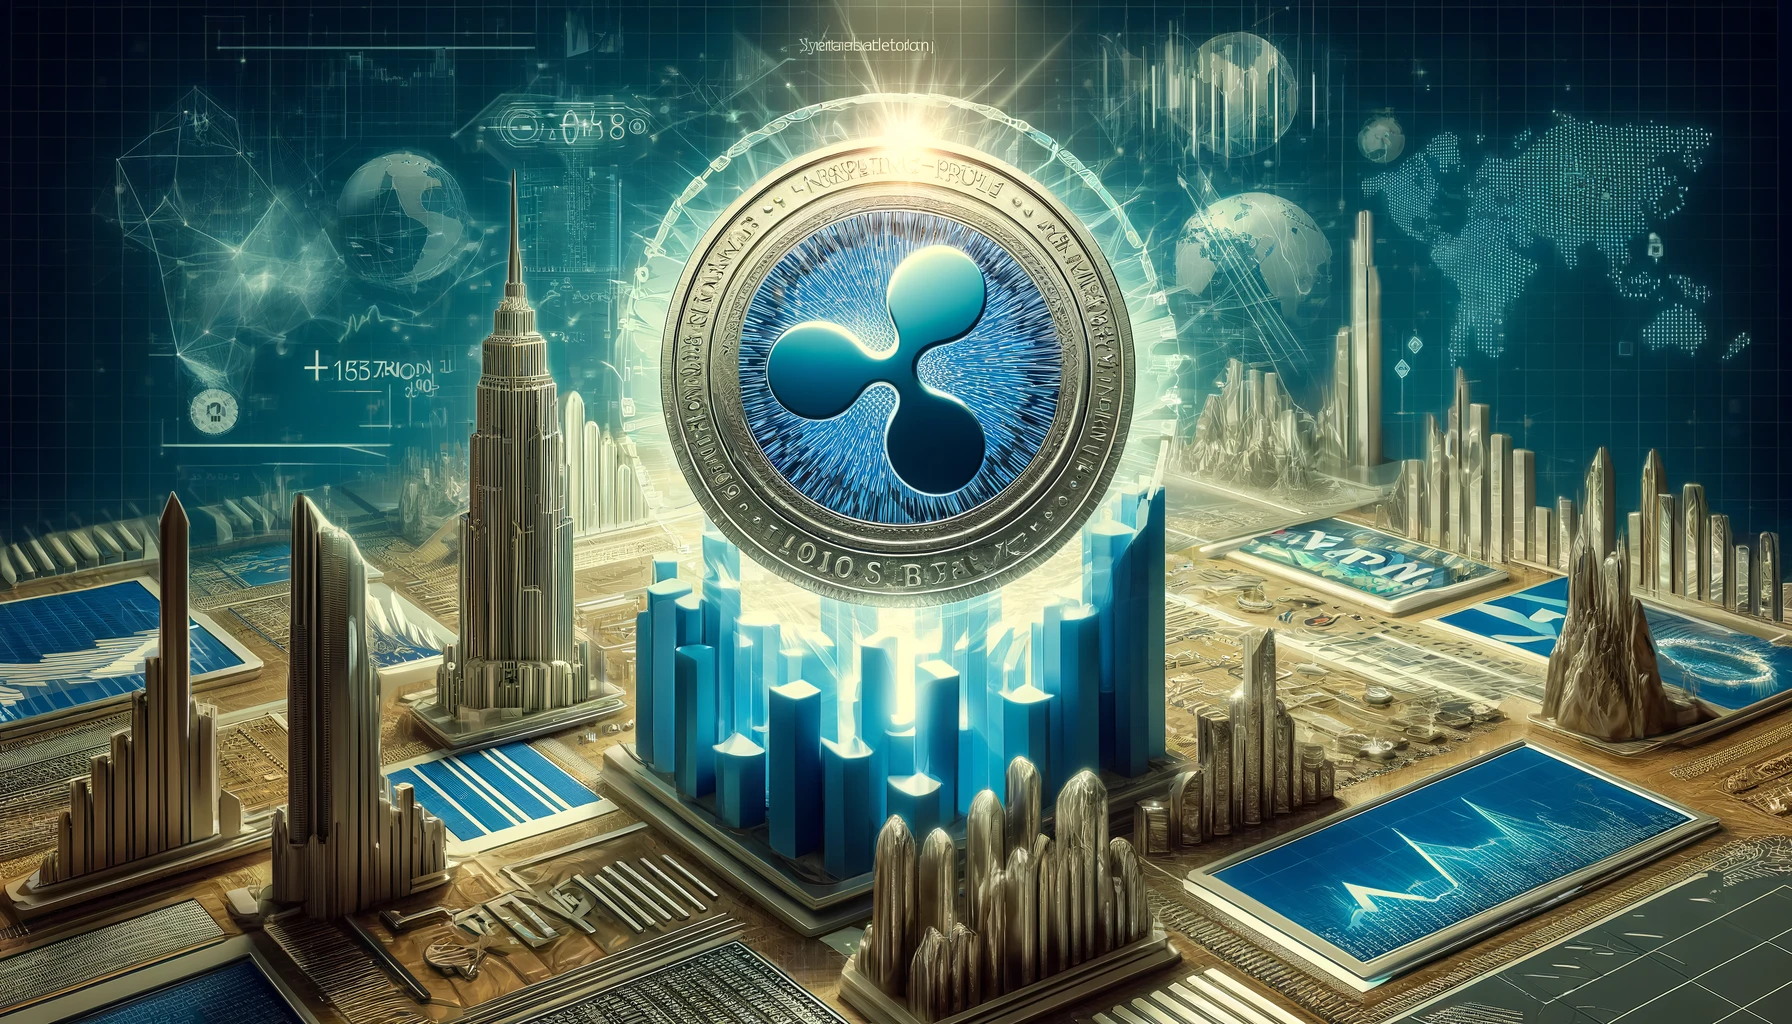 Ripple’s Stablecoin Ambitions Could Propel XRP to $12, Says Expert